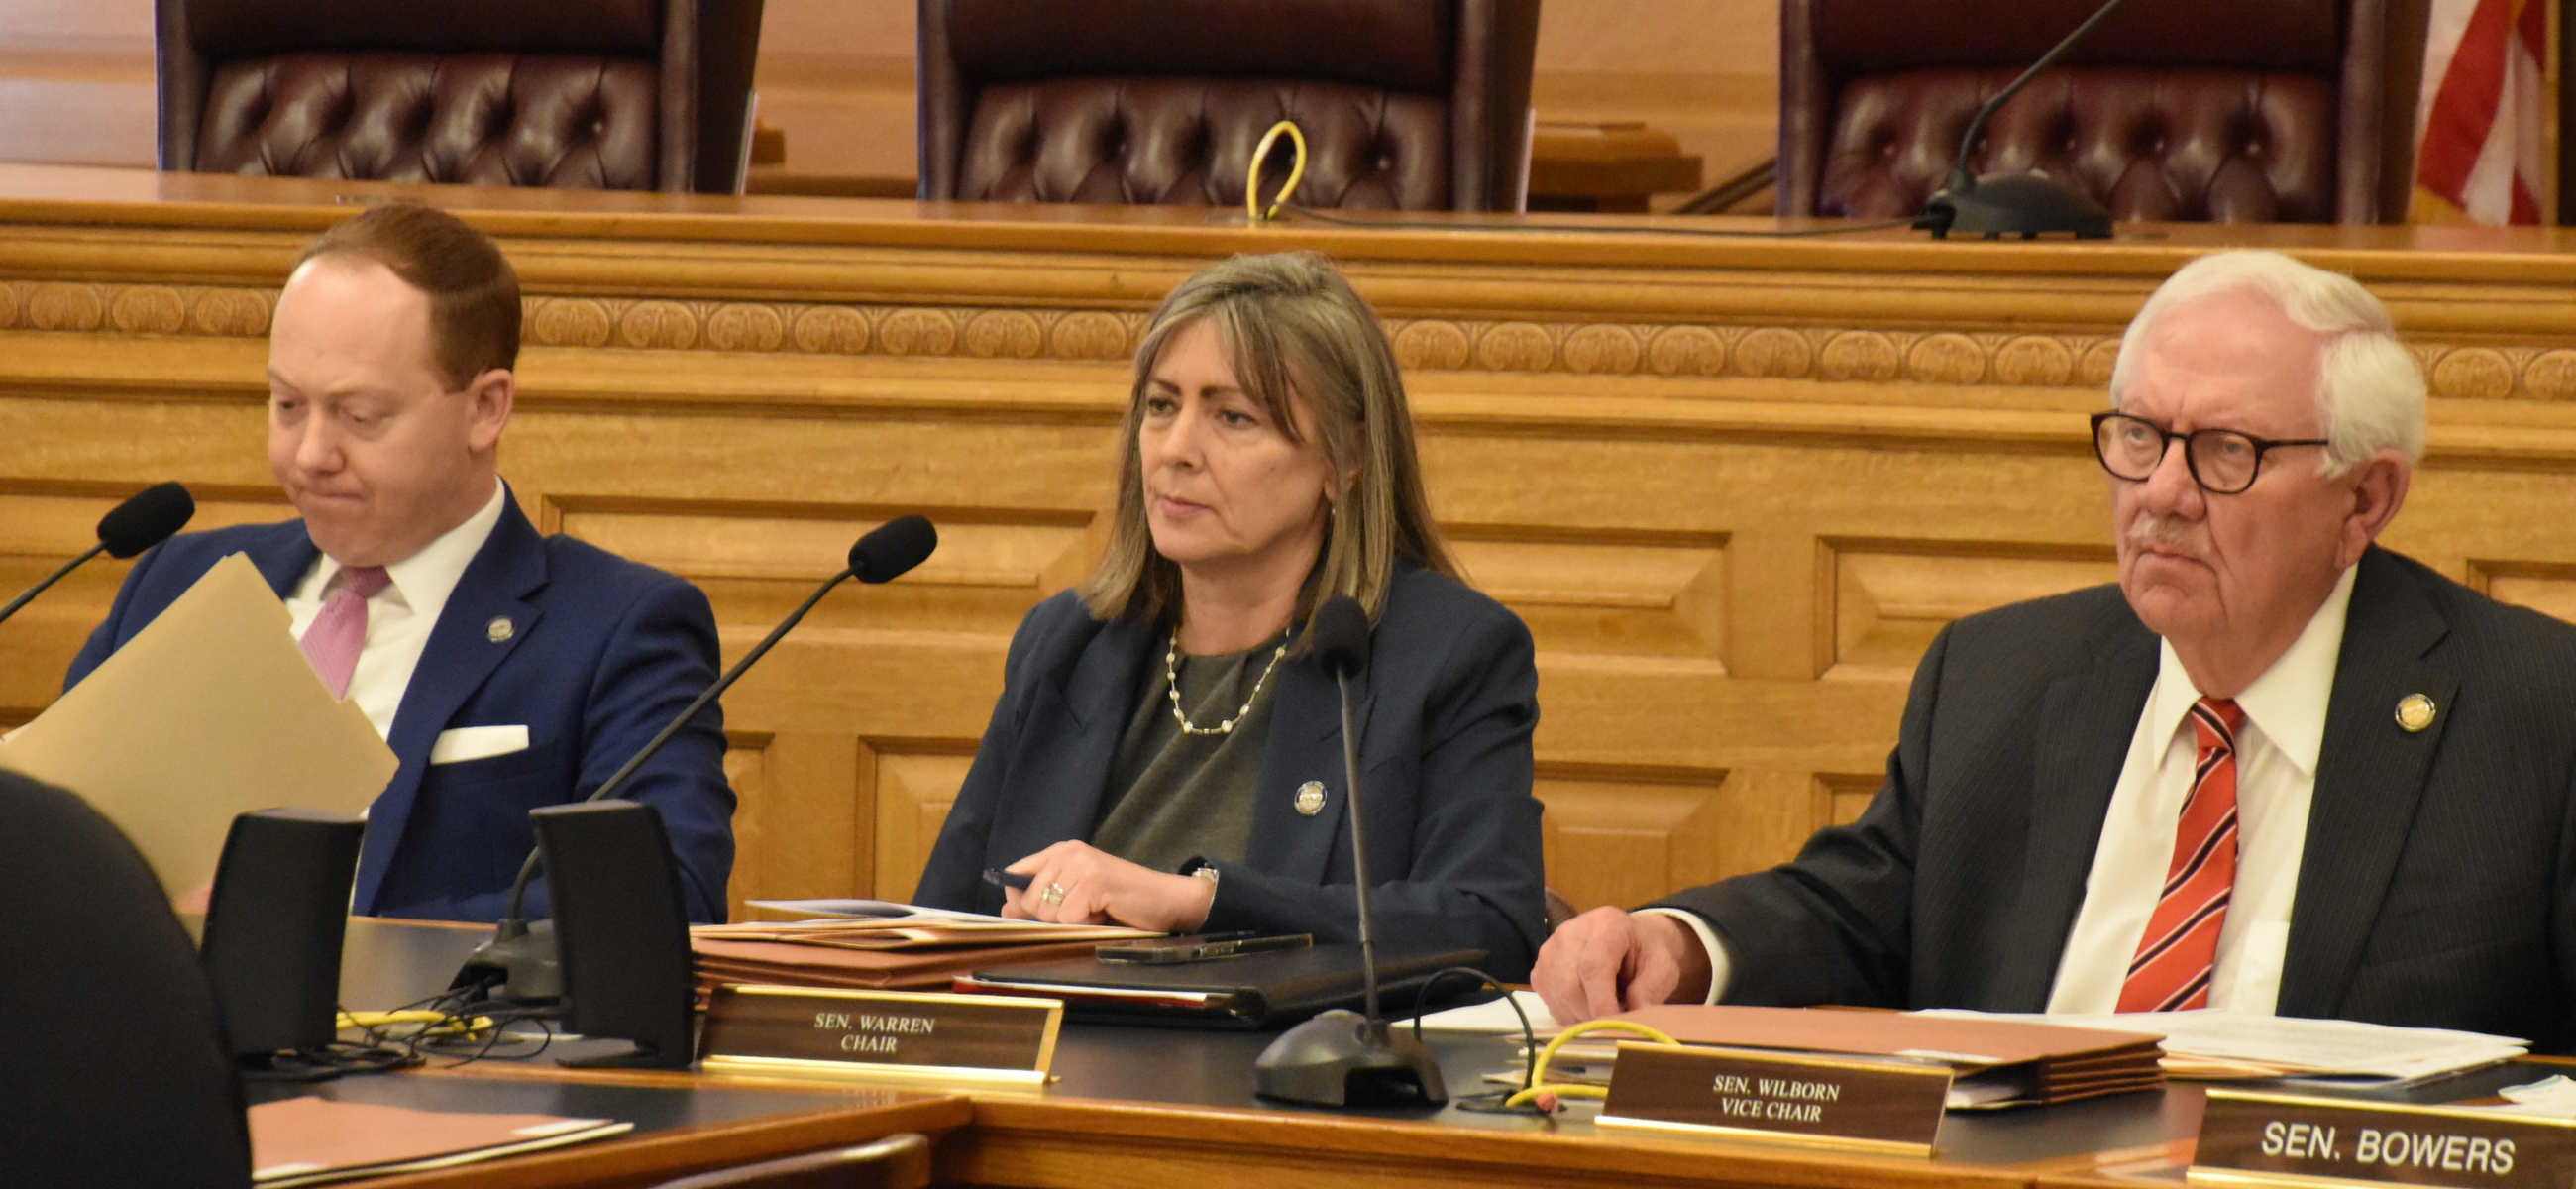 Sens. Ethan Corson, Kellie Warren and and Rick Wilborn listen to testimony during a Feb. 8 Judiciary Committee meeting.